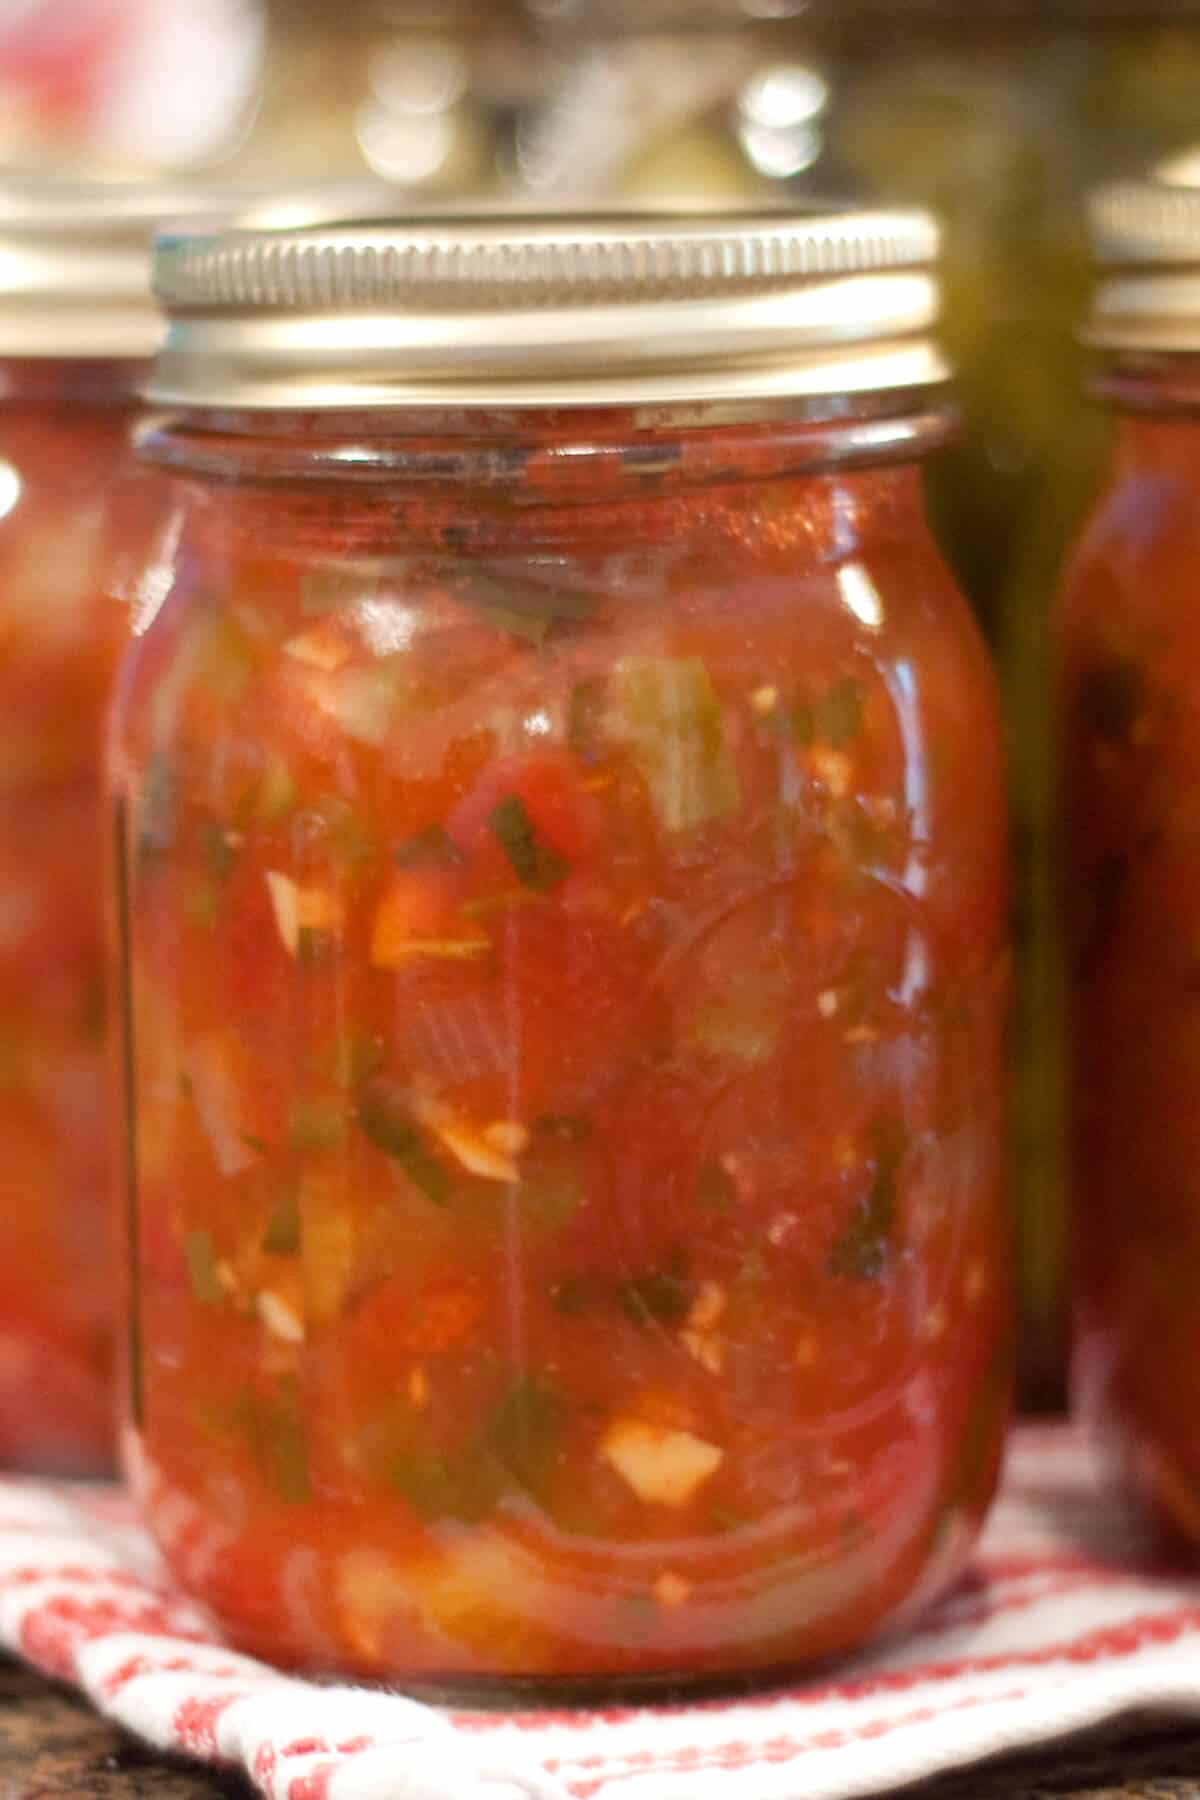 Jars of finished canned salsa sitting on a kitchen towel.